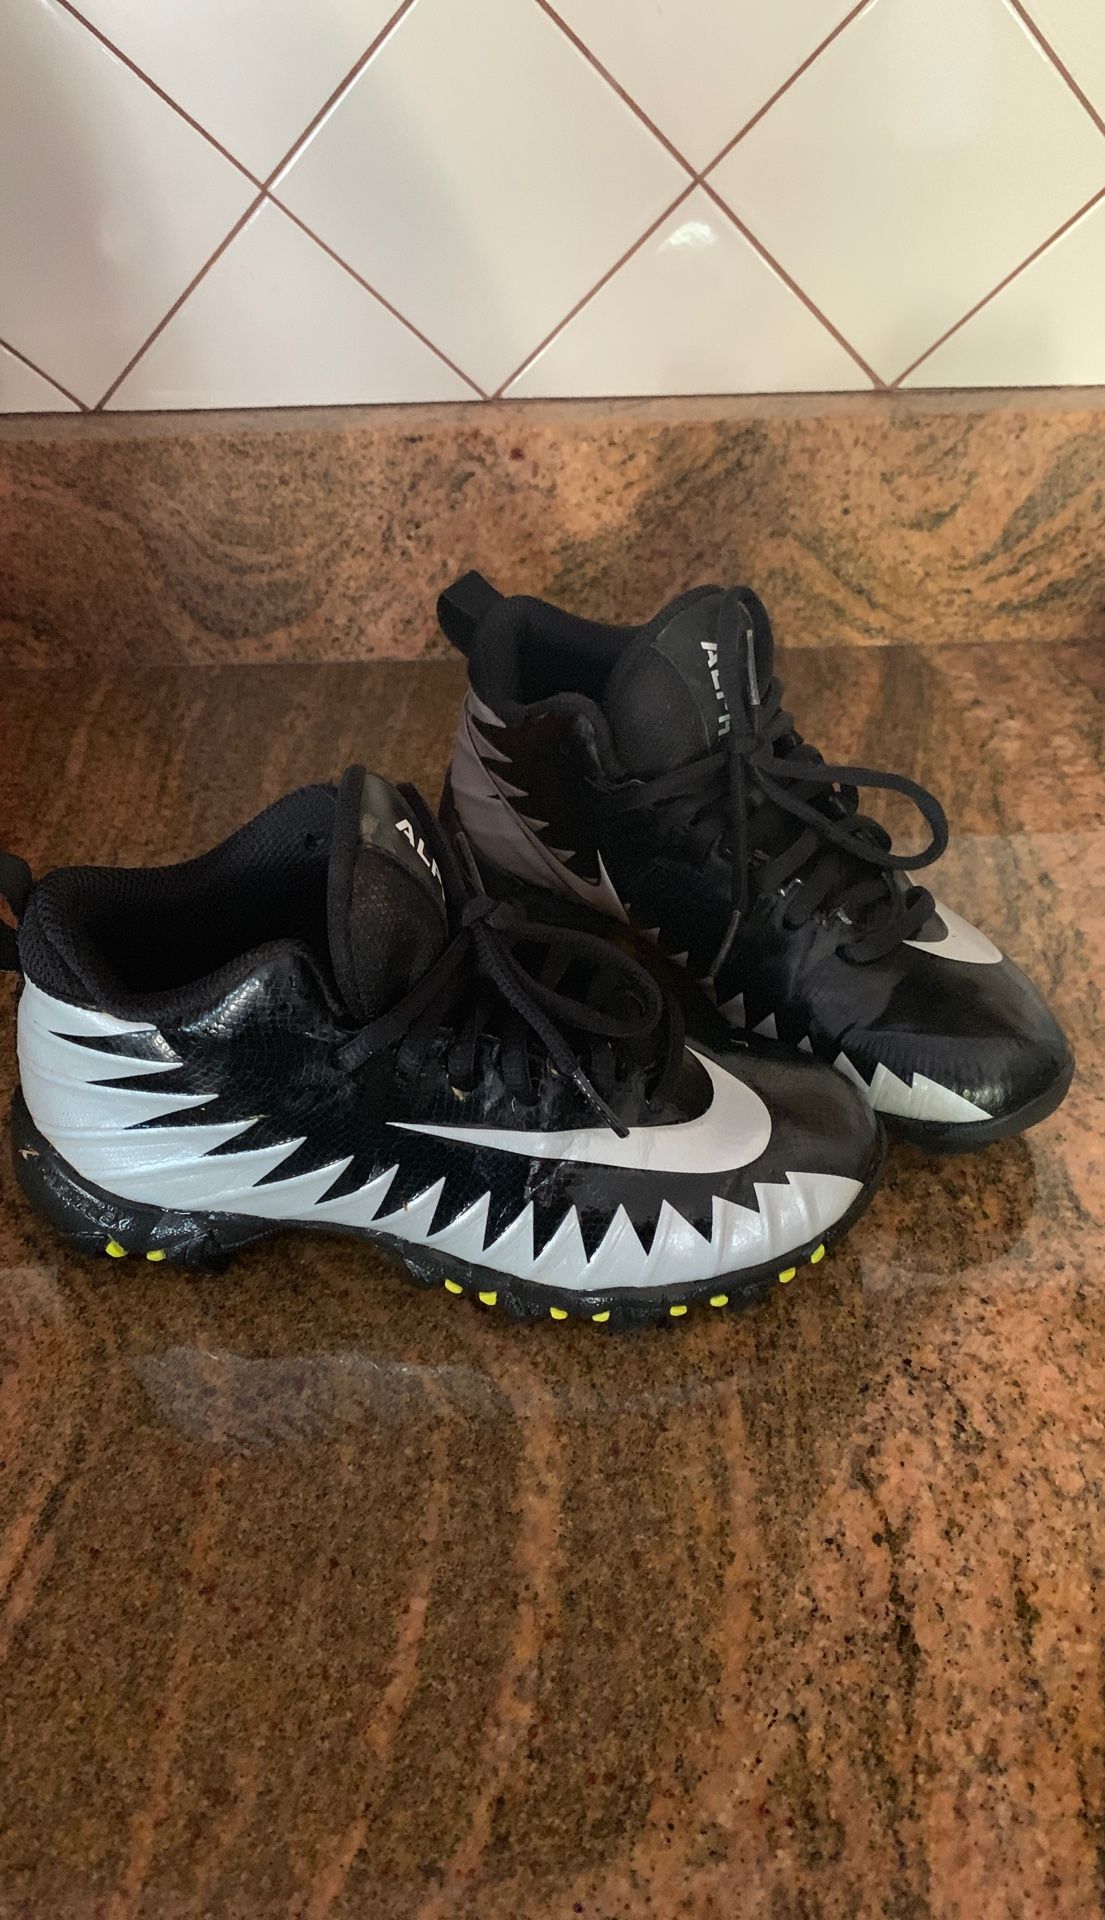 Football cleats for little boys size 1Y